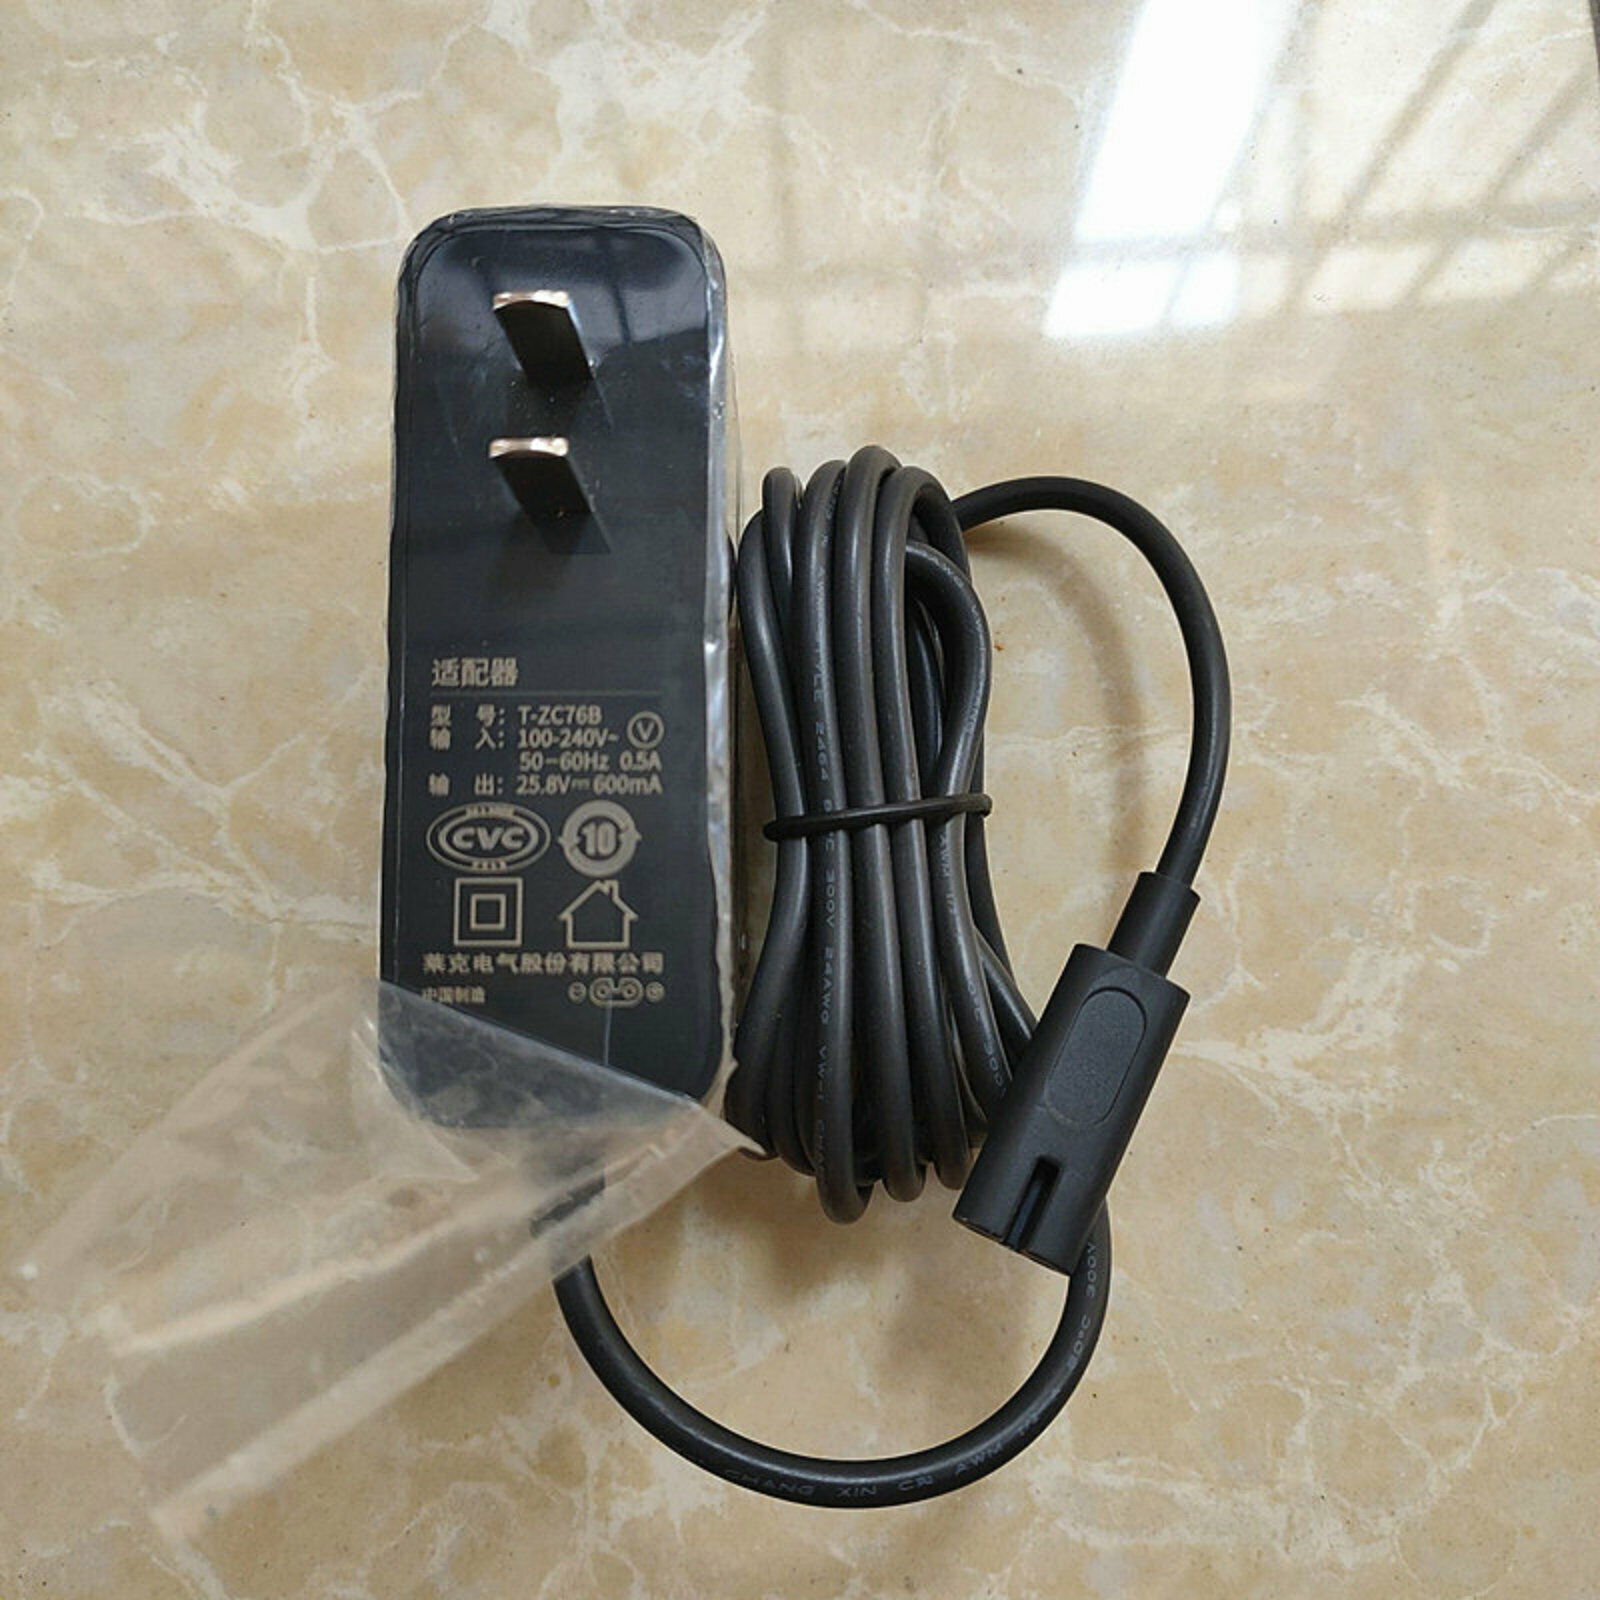 1pcs New AC Adapter Power Charger For JIMMY T-ZC76B 25.8V 600MA 1pcs New AC Adapter Power Charger For JIMMY T-ZC76B 25. - Click Image to Close